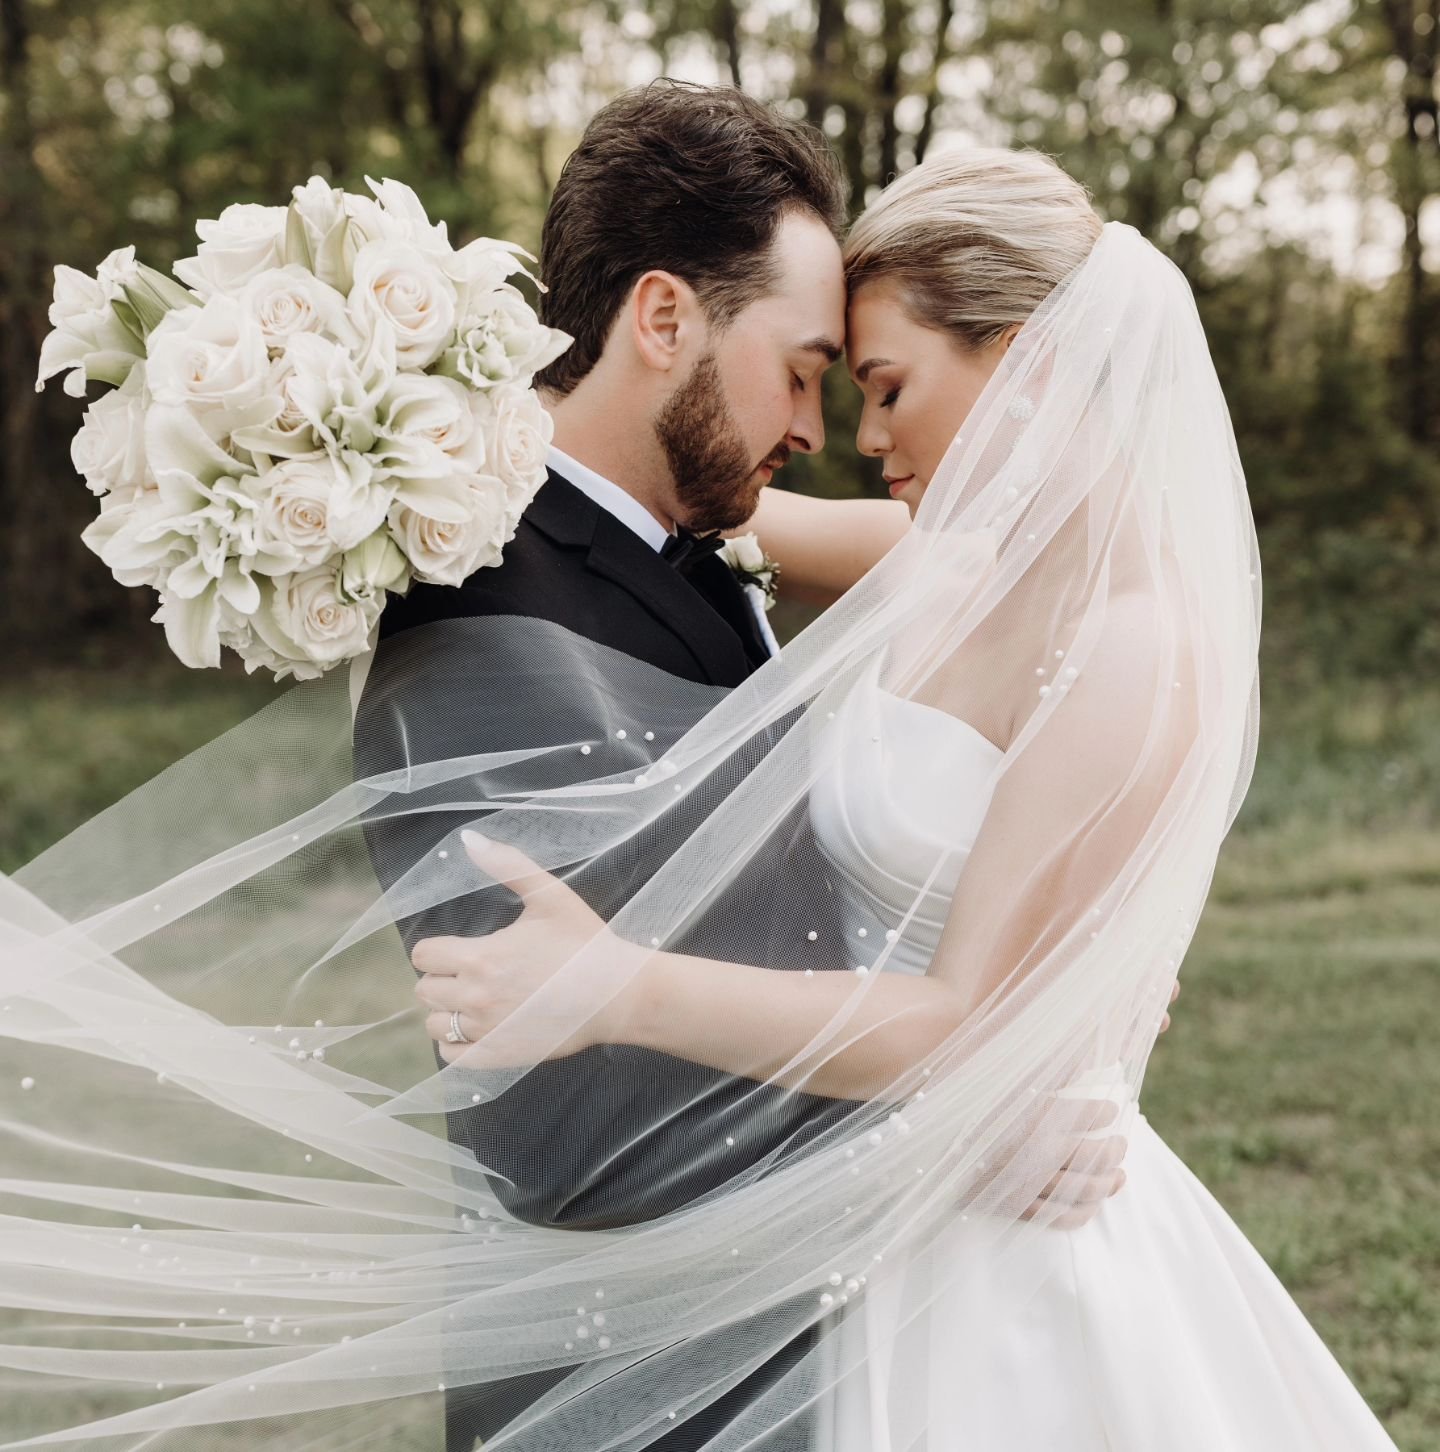 A few frames from Catie + Wade's beautiful spring wedding! 😍

Scrolling through these makes me so dang happy! These two were made for each other, and their day was just as stunning as they are!

The flowers, the venue, the elegance, ugh I can't get 